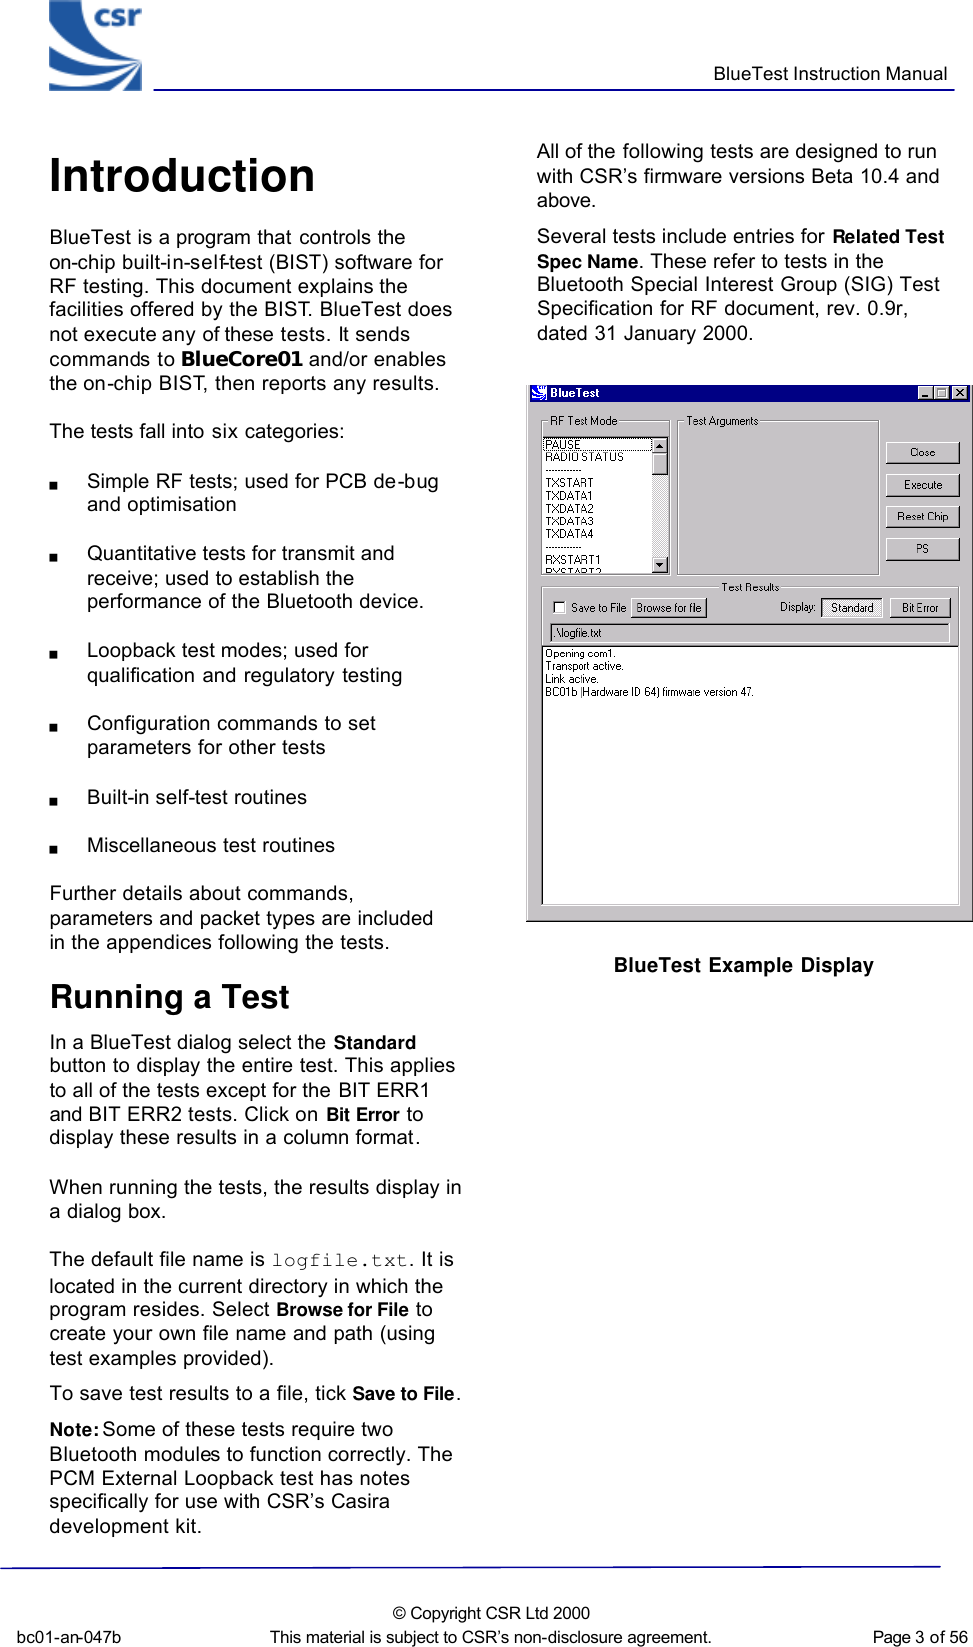      BlueTest Instruction Manual  bc01-an-047b  © Copyright CSR Ltd 2000 This material is subject to CSR’s non-disclosure agreement.   Page 3 of 56  BlueCoreTM01 Introduction BlueTest is a program that controls the on-chip built-in-self-test (BIST) software for RF testing. This document explains the facilities offered by the BIST. BlueTest does not execute any of these tests. It sends commands to BlueCore01 and/or enables the on-chip BIST, then reports any results. The tests fall into six categories: g Simple RF tests; used for PCB de-bug and optimisation g Quantitative tests for transmit and receive; used to establish the performance of the Bluetooth device. g Loopback test modes; used for qualification and regulatory testing g Configuration commands to set parameters for other tests g Built-in self-test routines g Miscellaneous test routines Further details about commands, parameters and packet types are included in the appendices following the tests.  Running a Test In a BlueTest dialog select the Standard button to display the entire test. This applies to all of the tests except for the BIT ERR1 and BIT ERR2 tests. Click on Bit Error to display these results in a column format.  When running the tests, the results display in a dialog box. The default file name is logfile.txt. It is located in the current directory in which the program resides. Select Browse for File to create your own file name and path (using test examples provided). To save test results to a file, tick Save to File.  Note: Some of these tests require two Bluetooth modules to function correctly. The PCM External Loopback test has notes specifically for use with CSR’s Casira development kit.  All of the following tests are designed to run with CSR’s firmware versions Beta 10.4 and above. Several tests include entries for Related Test Spec Name. These refer to tests in the Bluetooth Special Interest Group (SIG) Test Specification for RF document, rev. 0.9r, dated 31 January 2000.    BlueTest Example Display 